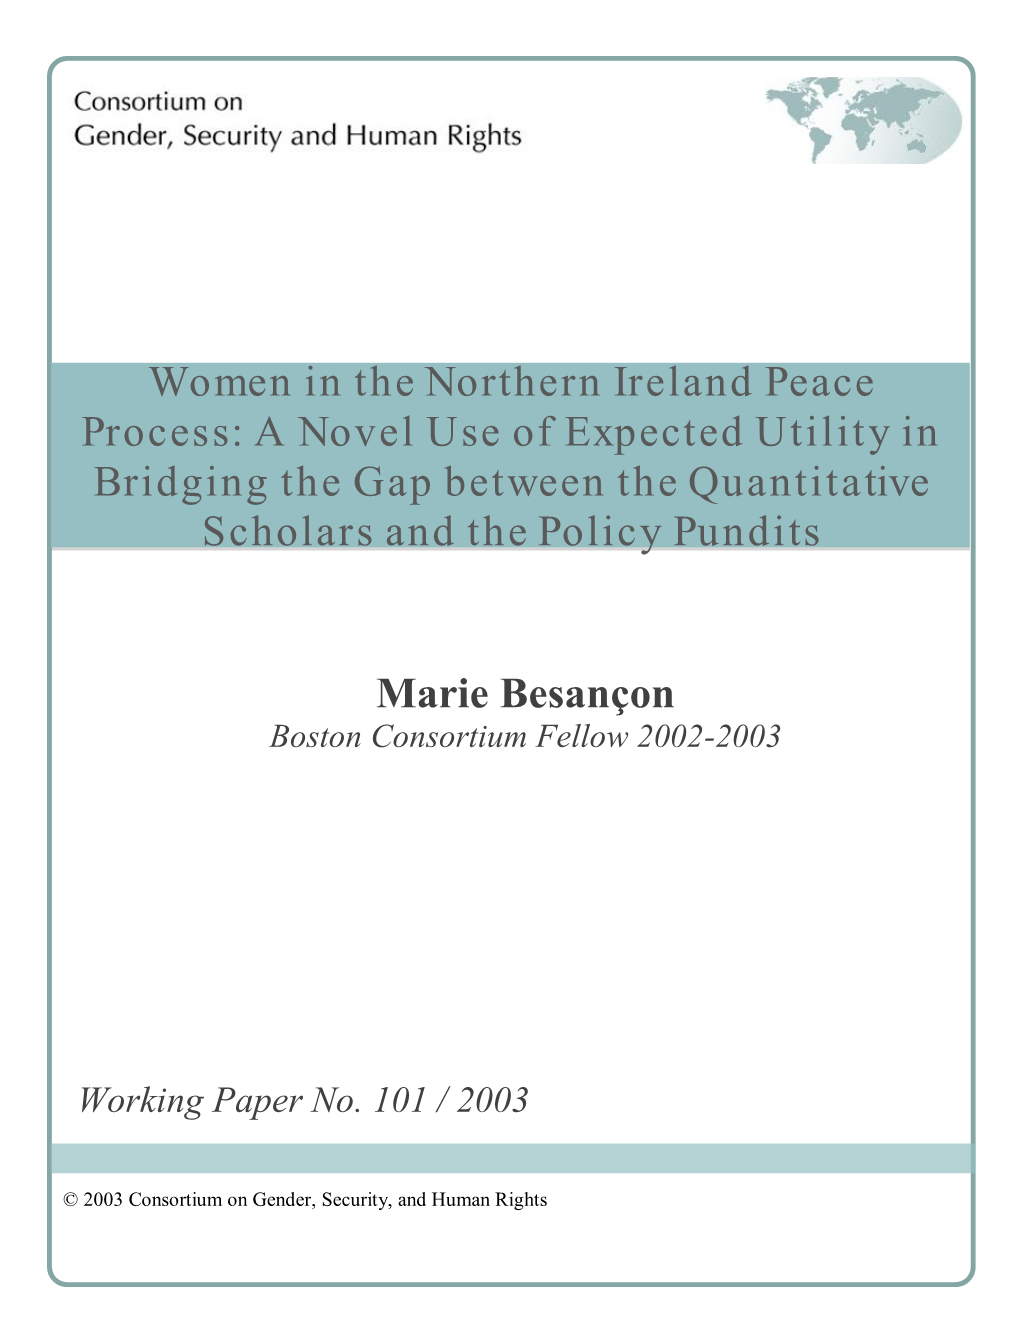 Women in the Northern Ireland Peace Process: a Novel Use of Expected Utility in Bridging